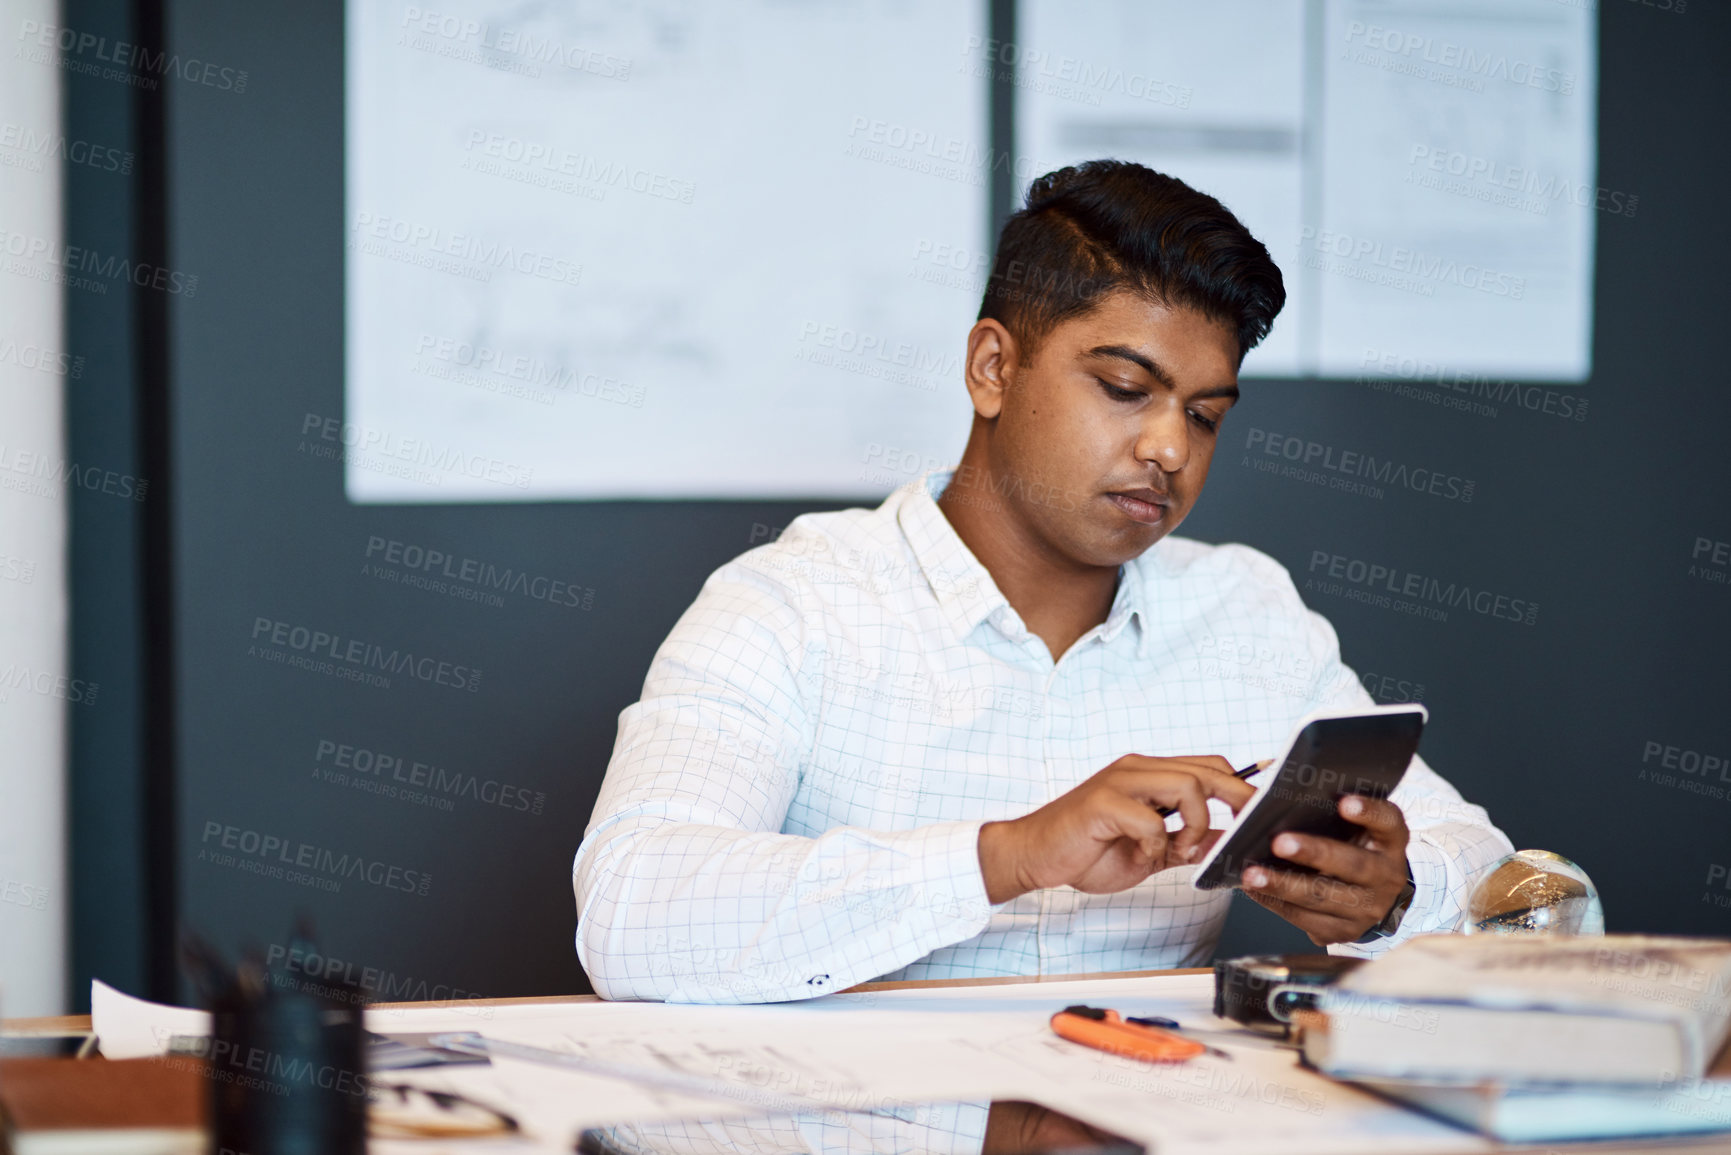 Buy stock photo Shot of a young architect using a calculator while drawing up a building plan